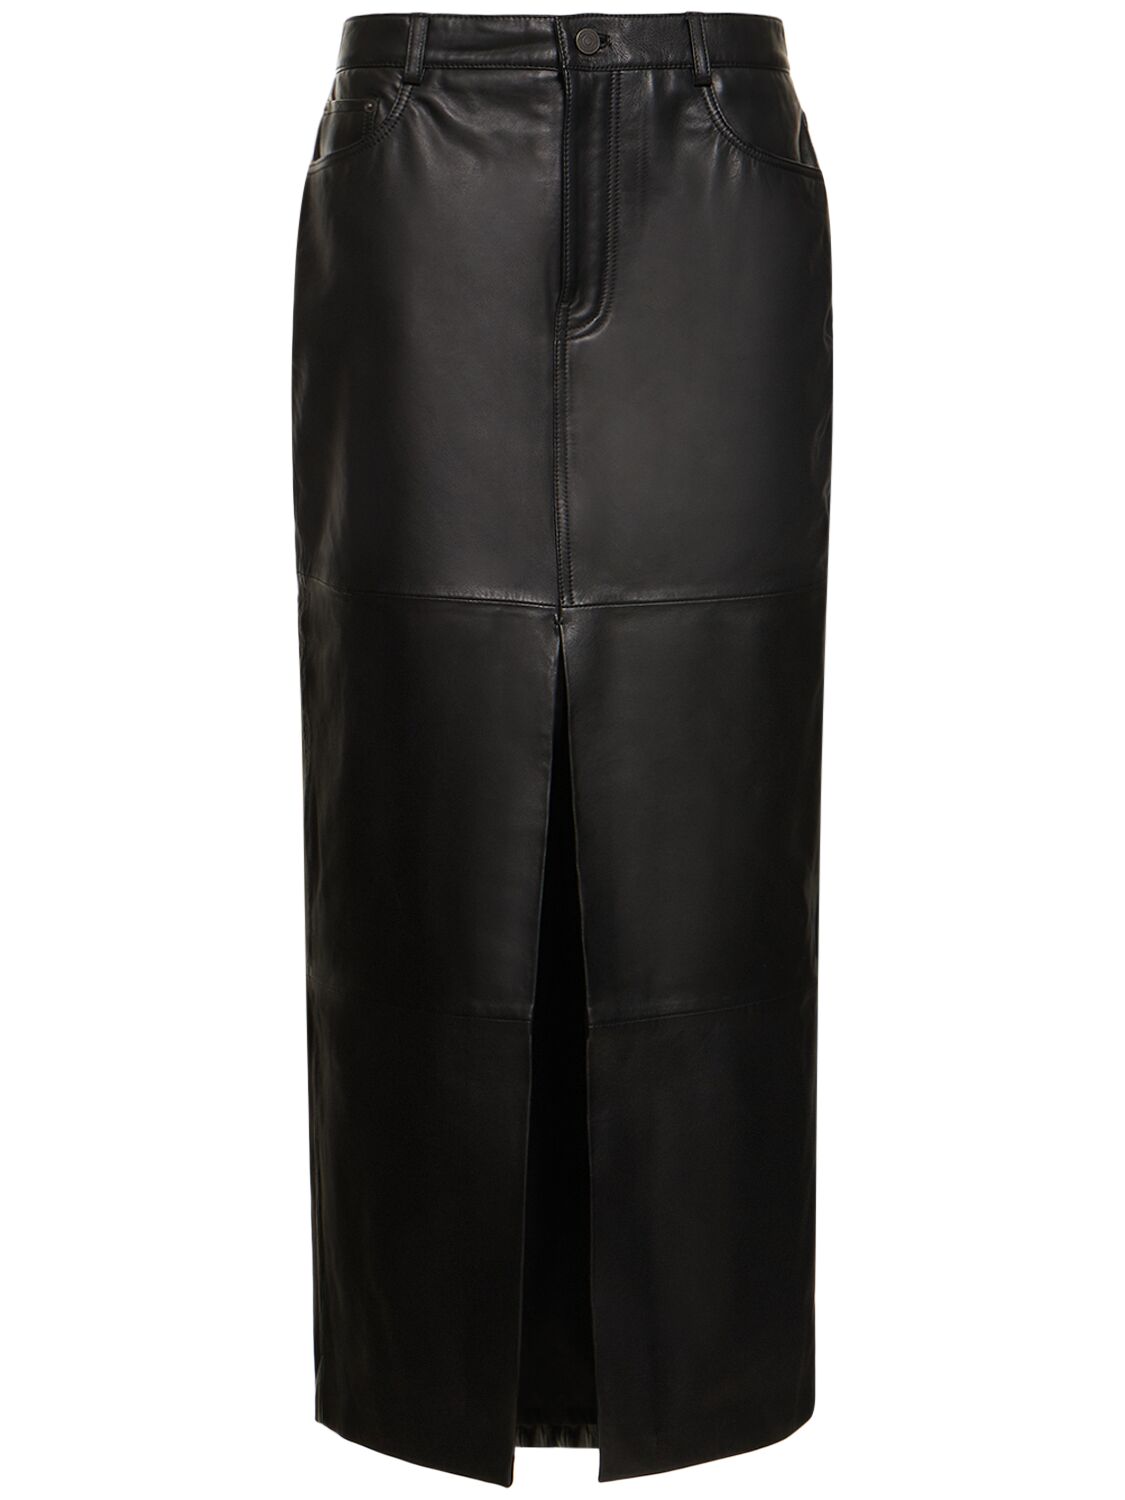 Veda Tazz Leather Maxi Skirt